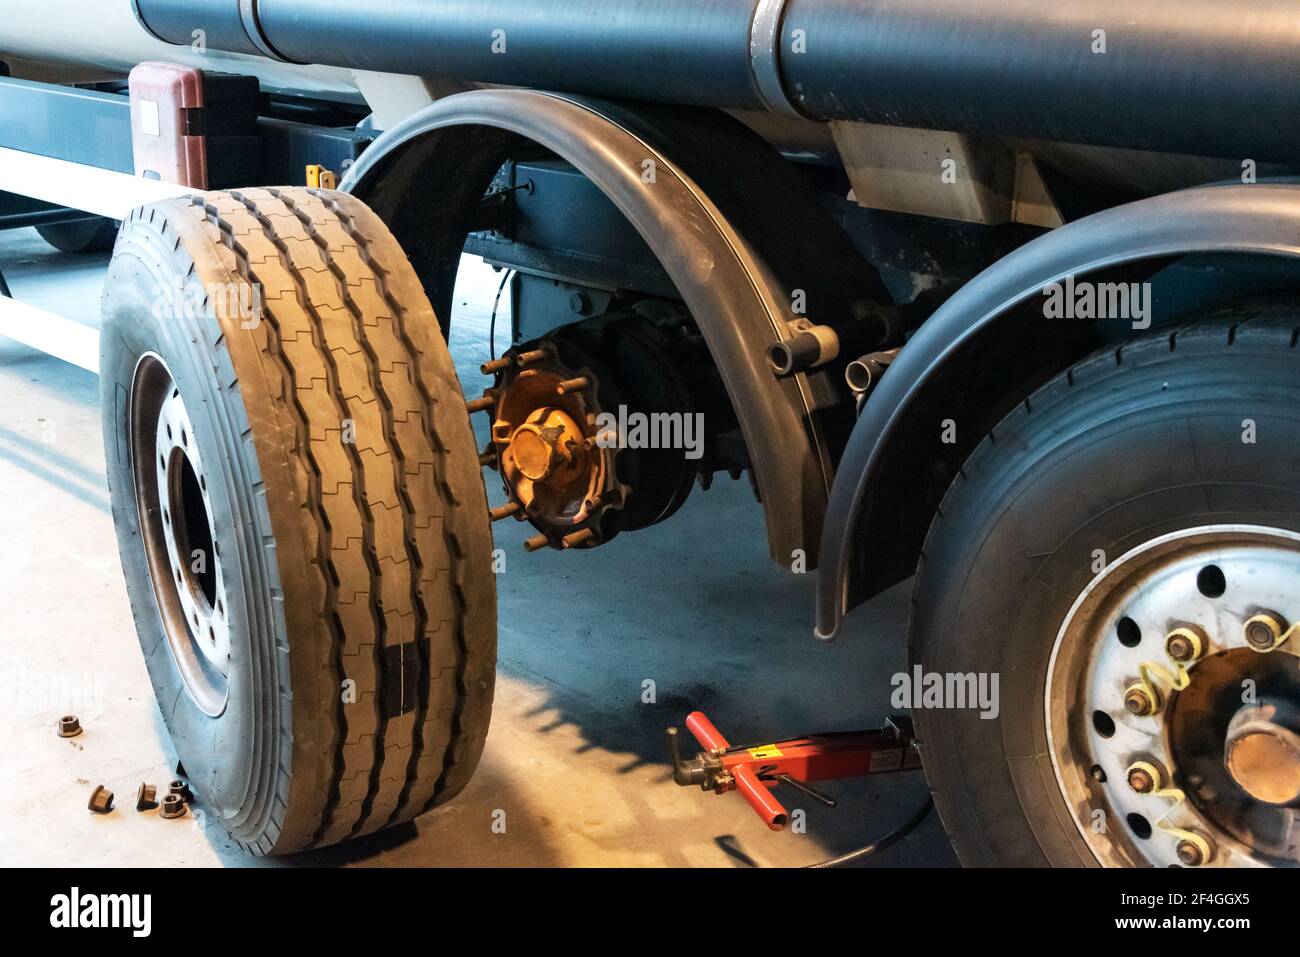 Truck in a tire shop changing wheels. Stock Photo